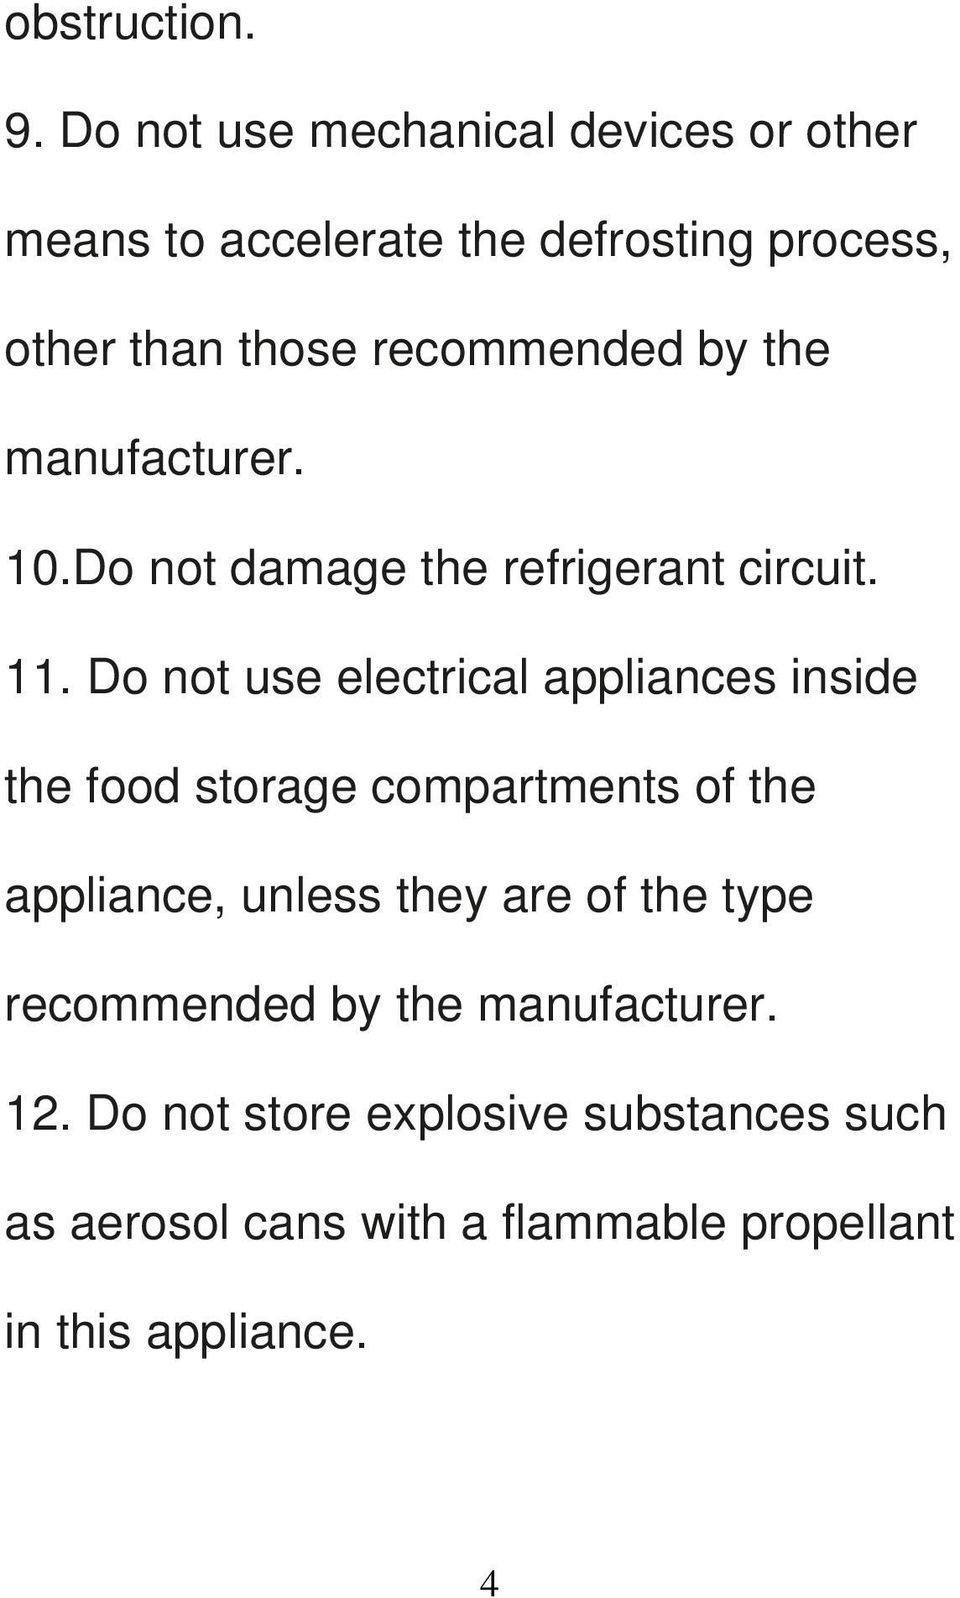 by the manufacturer. 10.Do not damage the refrigerant circuit. 11.